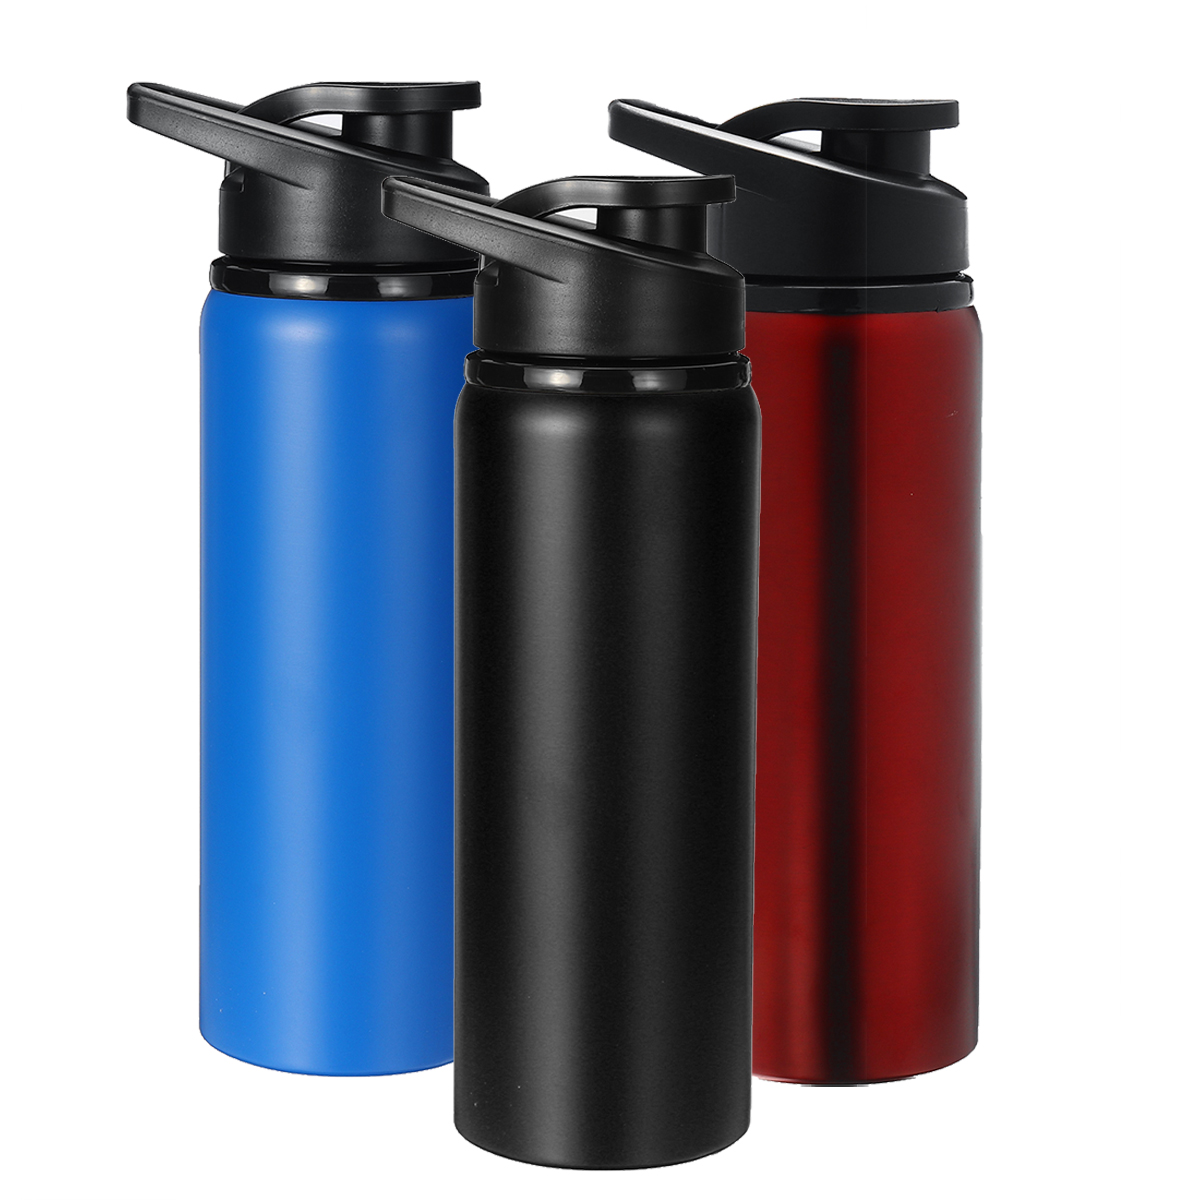 

700ml Outdoor Portable Water Bottle Stainless Steel Direct Drinking Cup Sports Travel Kettle